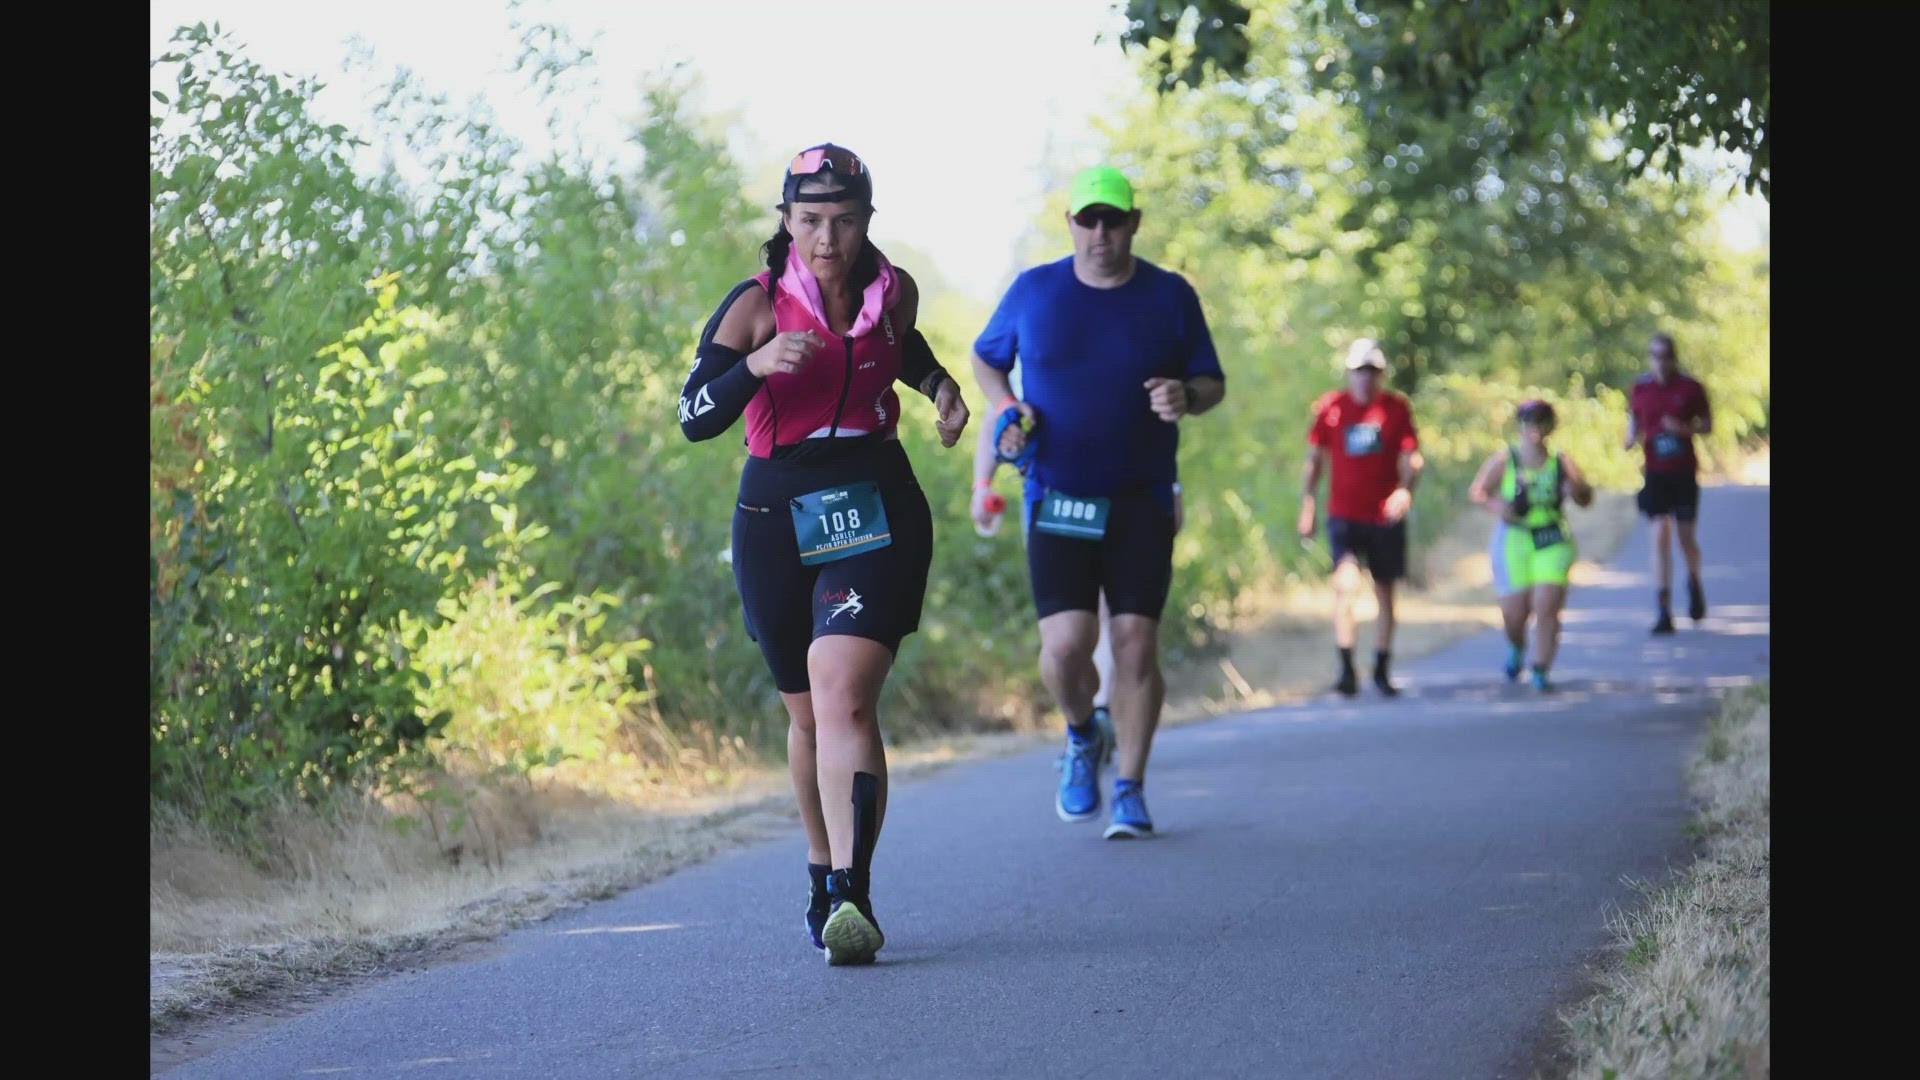 Competing in an IRONMAN is a feat for anyone but for one Renton single mom, the major event is being dedicated to others living with multiple sclerosis like her.